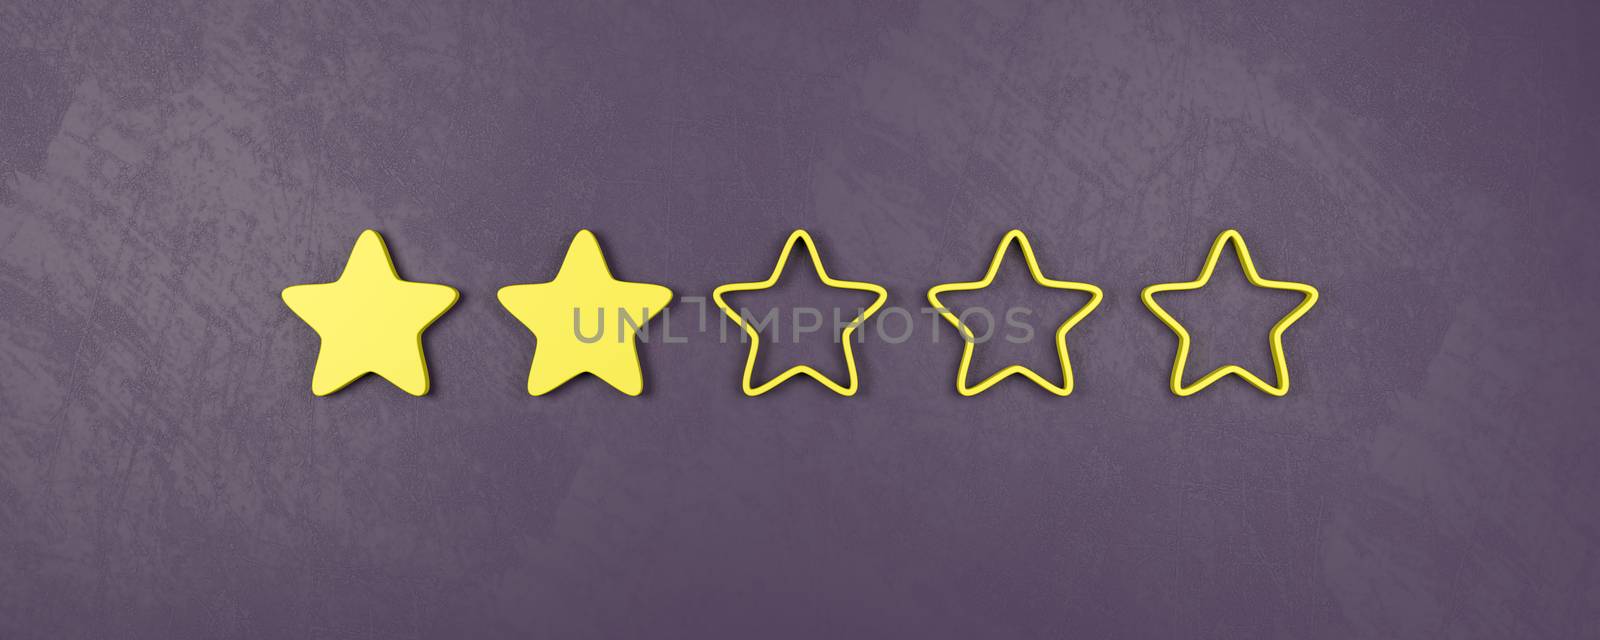 Two of Five Yellow Star Shapes 3D Illustration, Bad Rating Concepts